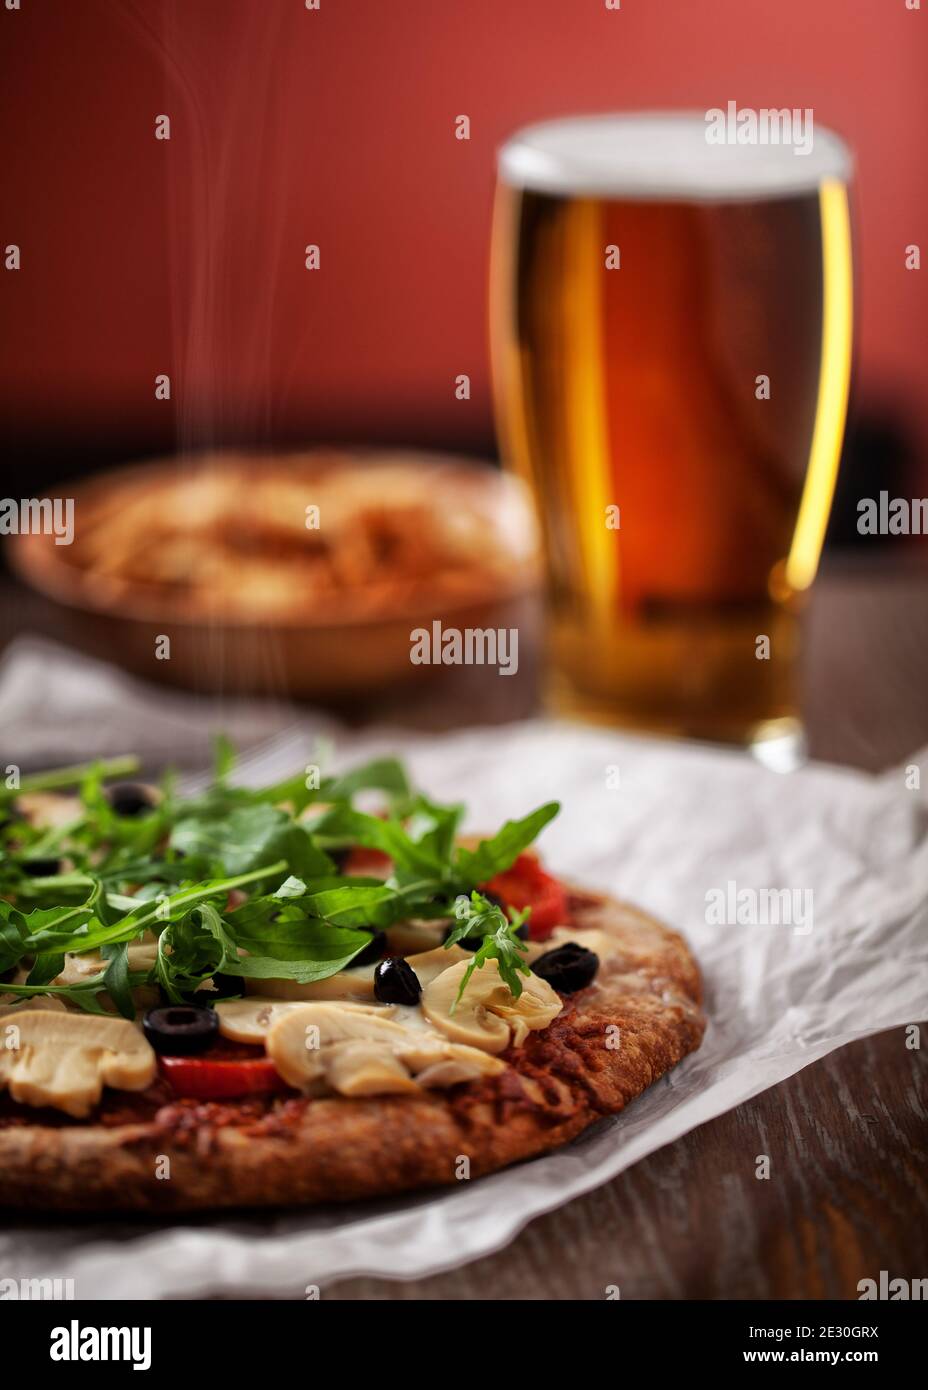 Pizza with Cheese, Tomatoes, Champignon, Olives and Arugola. Stock Photo